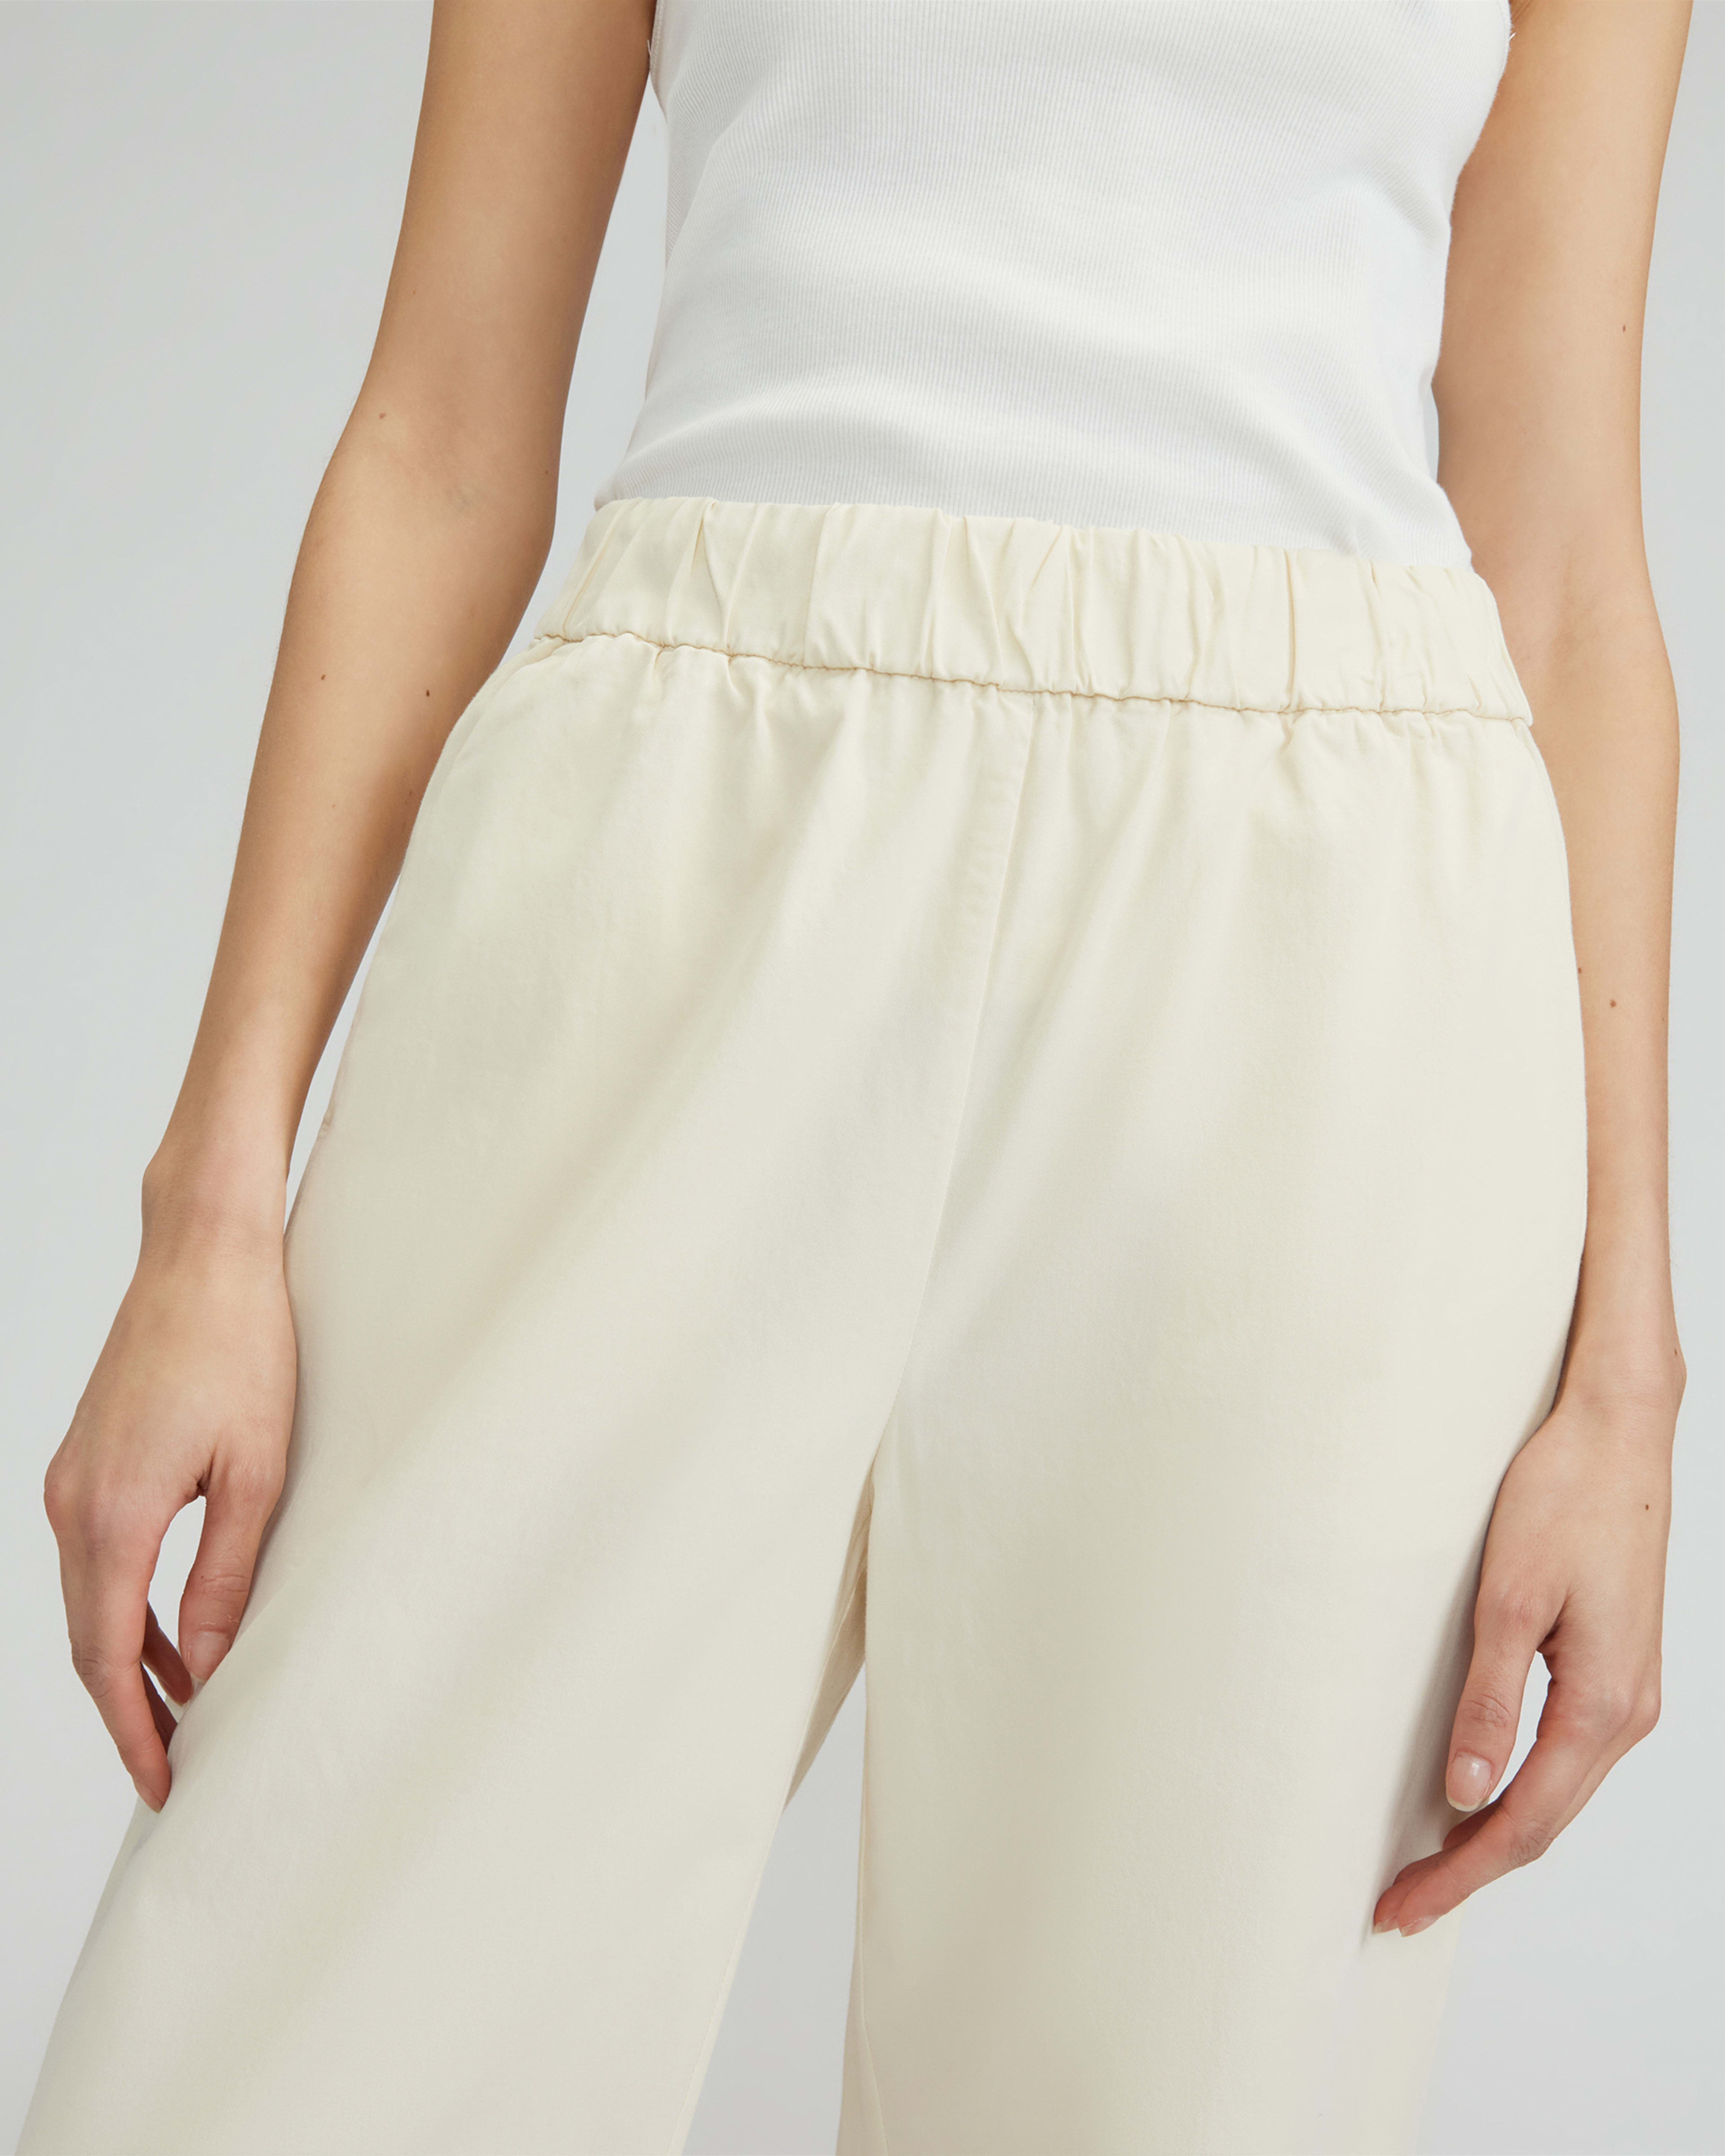 The Easy Pant Canvas – Everlane